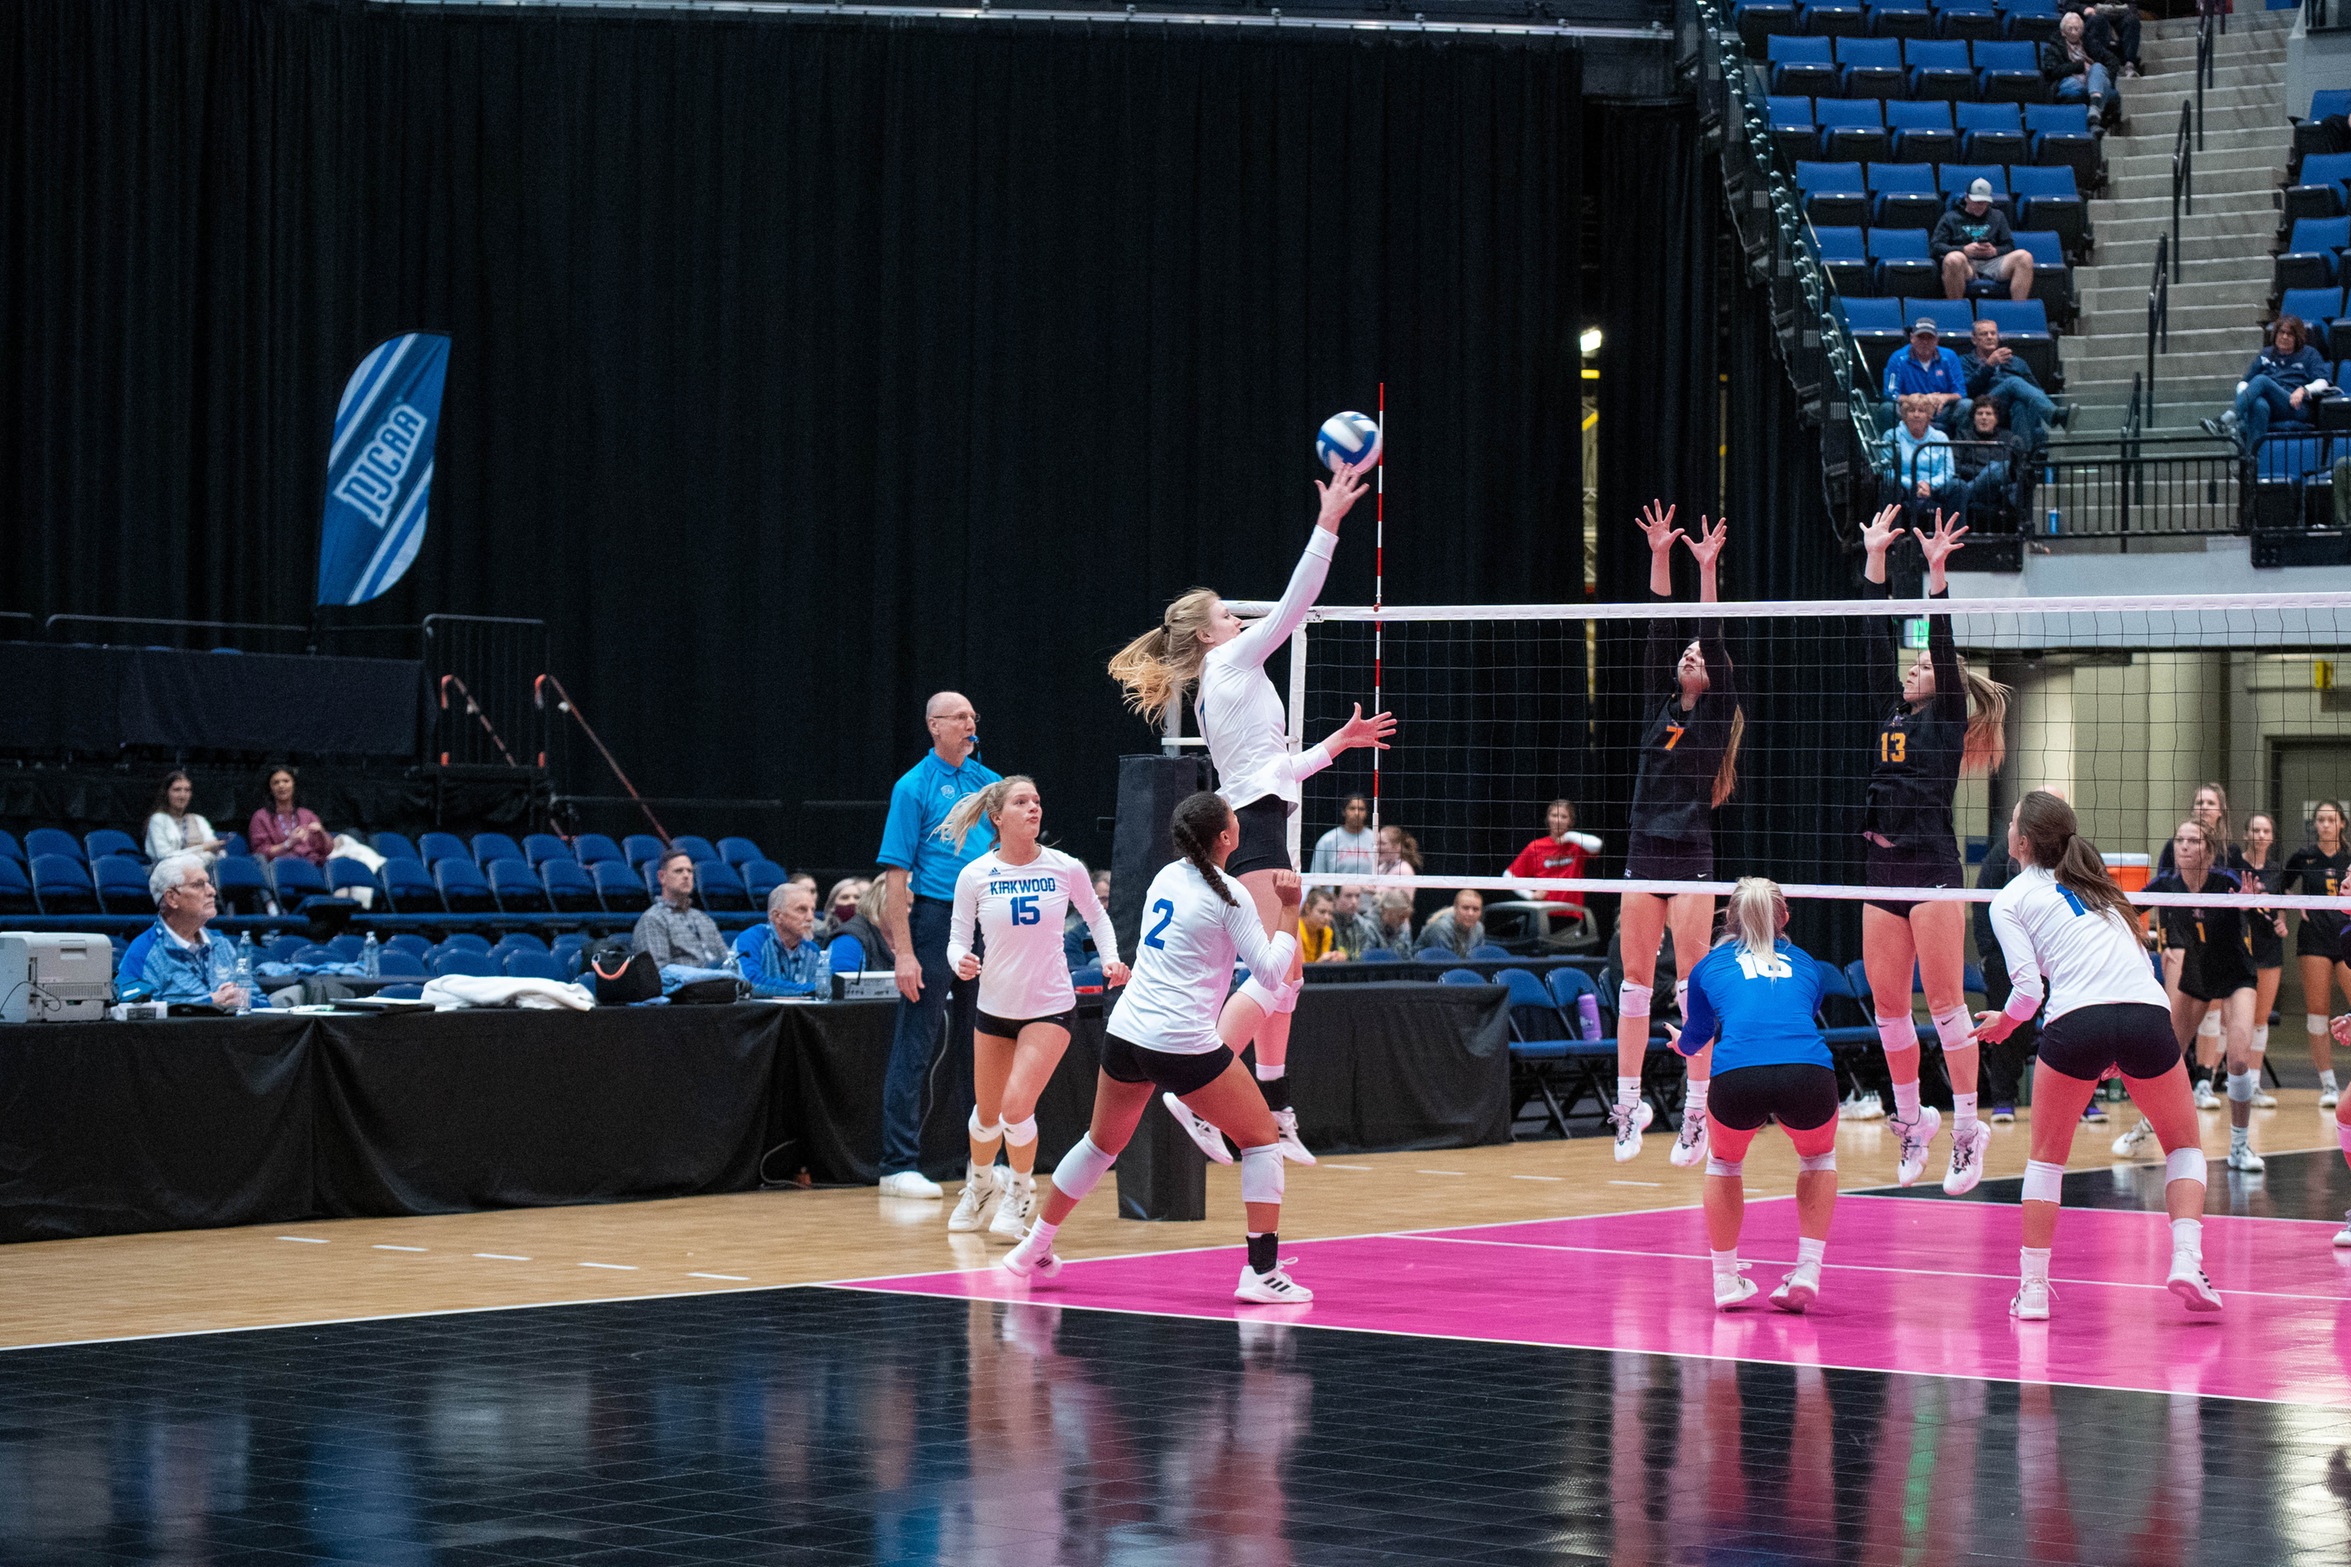 KIRKWOOD PLACES 8TH AT VOLLEYBALL NATIONALS